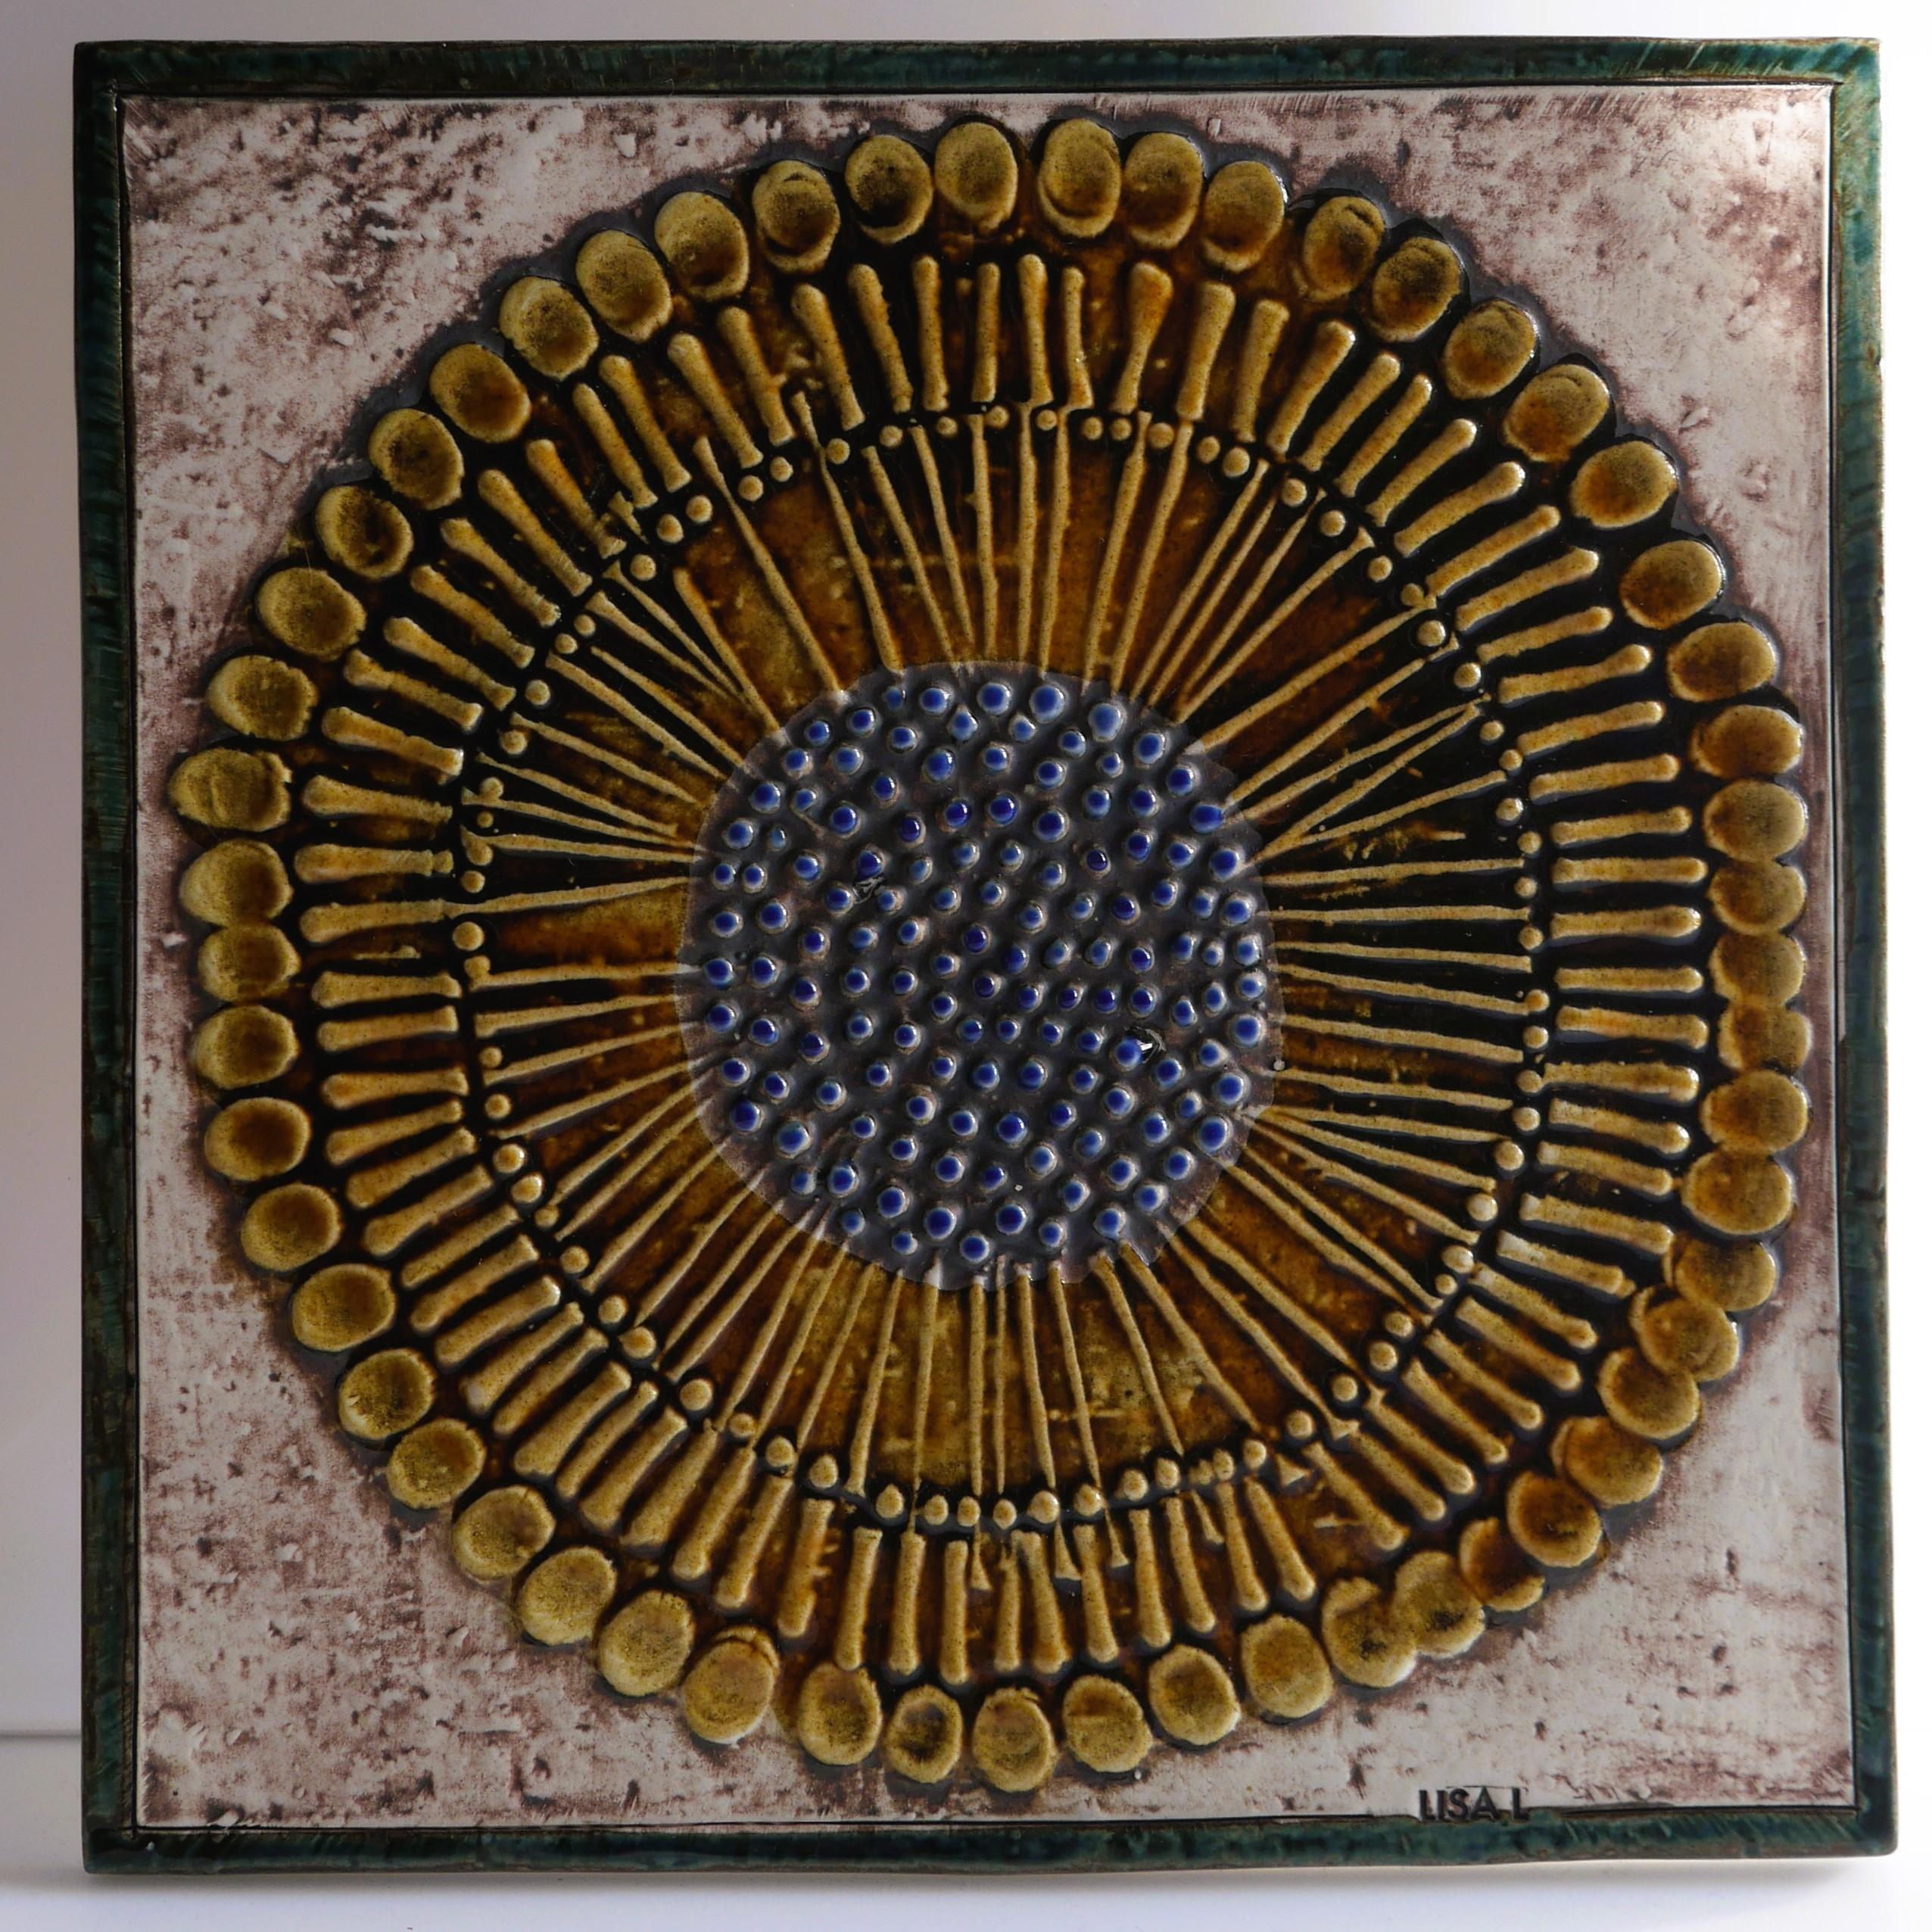 Handmade Sunflower Wall Plate or ceramic tile by Lisa Larson for Gustavsberg, 1961, all these plaques are unique, yet with one thing in common, apart from the depictionof a sunflower, which is that they are all fantastic, true to mrs Larson's naïve